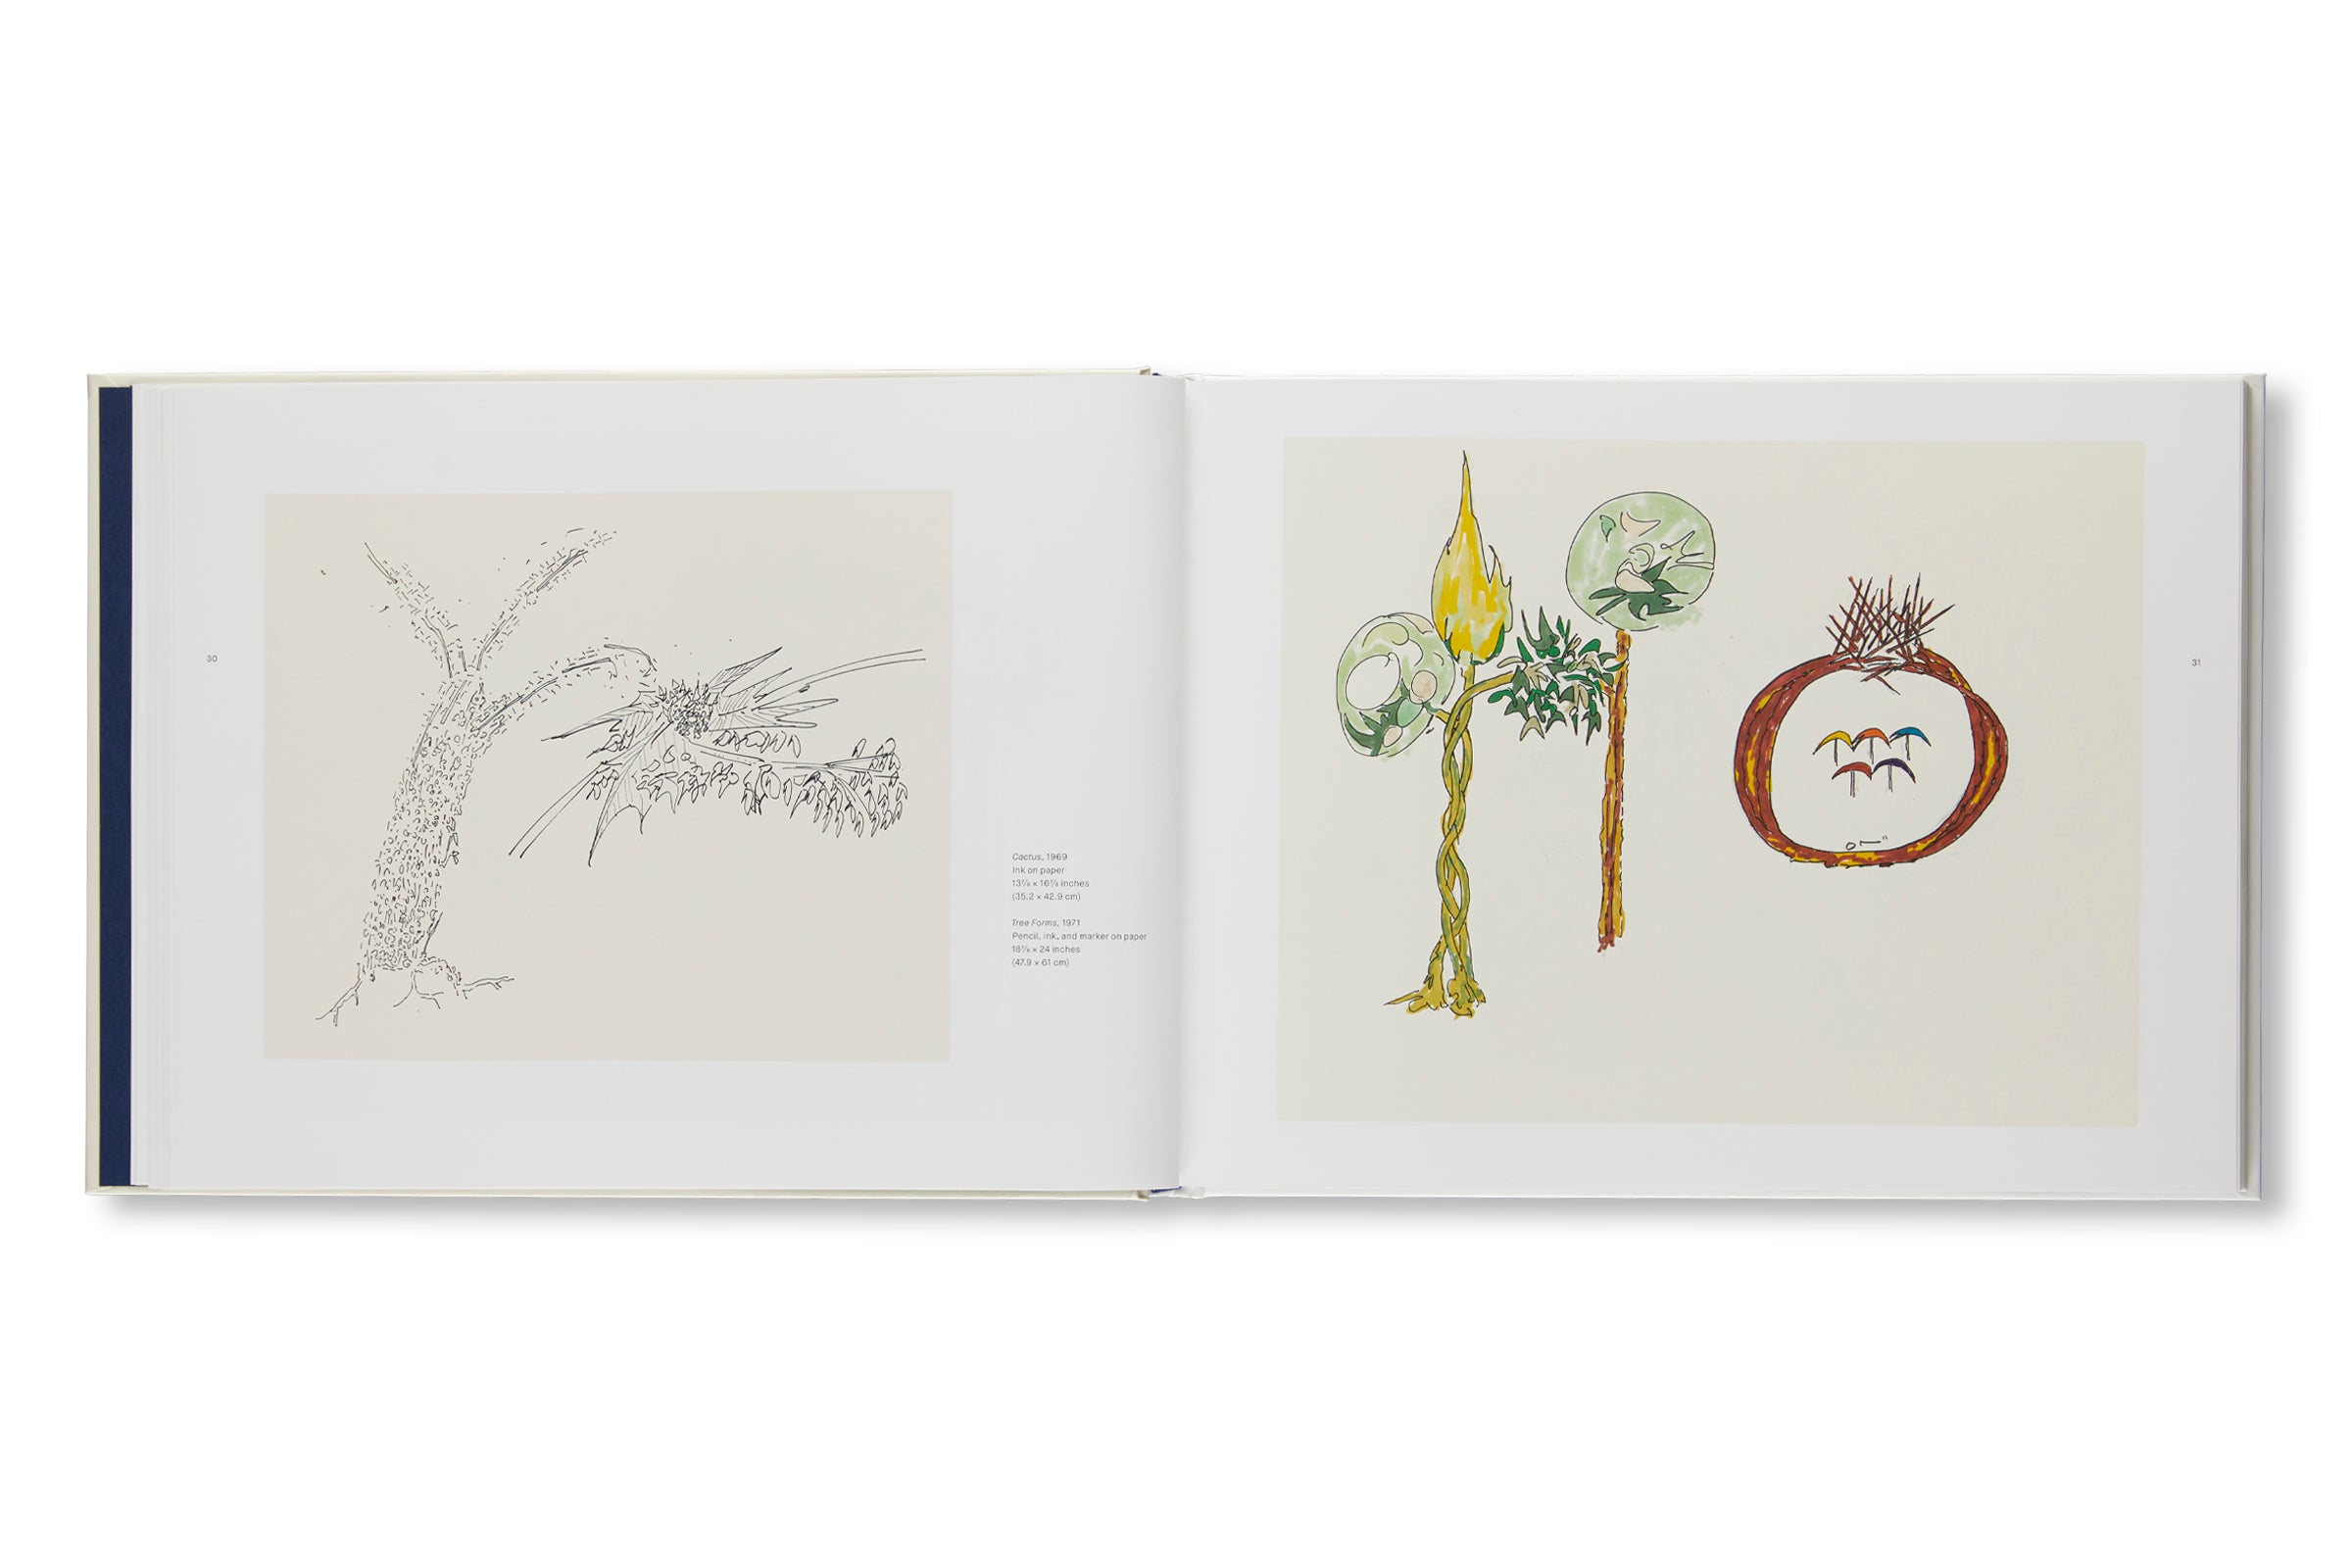 THE BEGINNING OF TREES AND THE END: DRAWINGS AND NOTEBOOKS by Gordon Matta-Clark